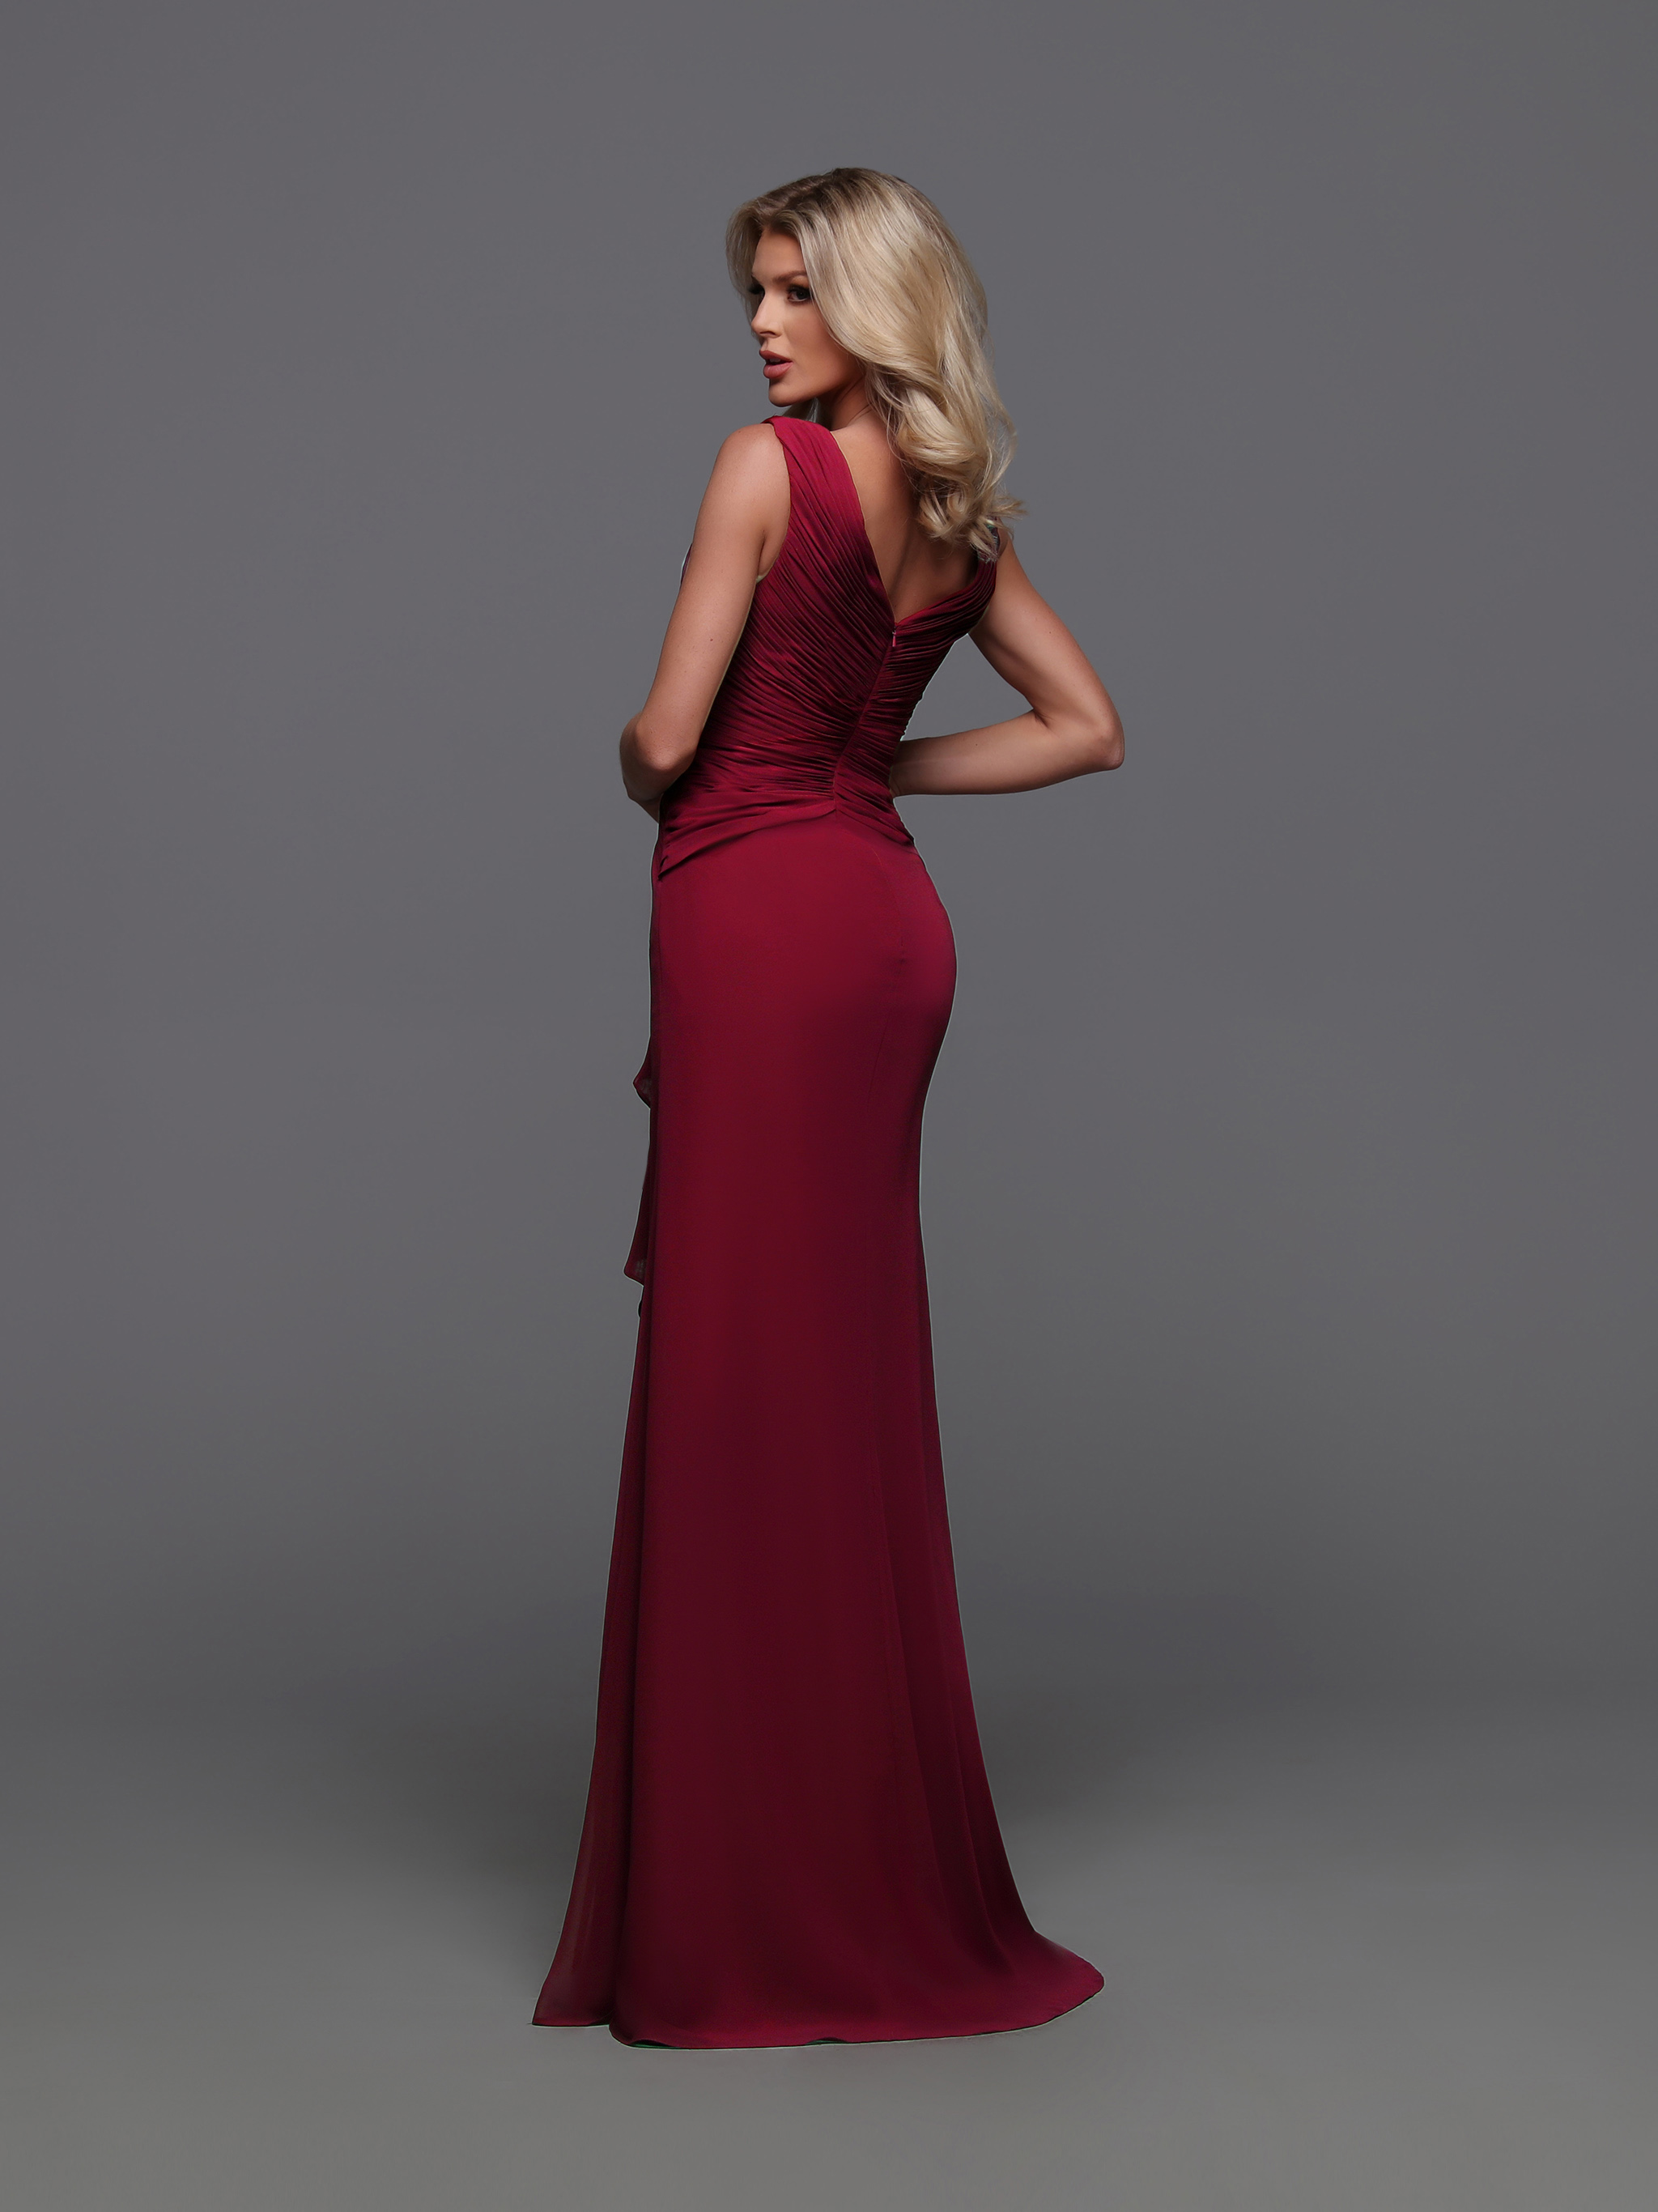 Image showing back view of style #60689